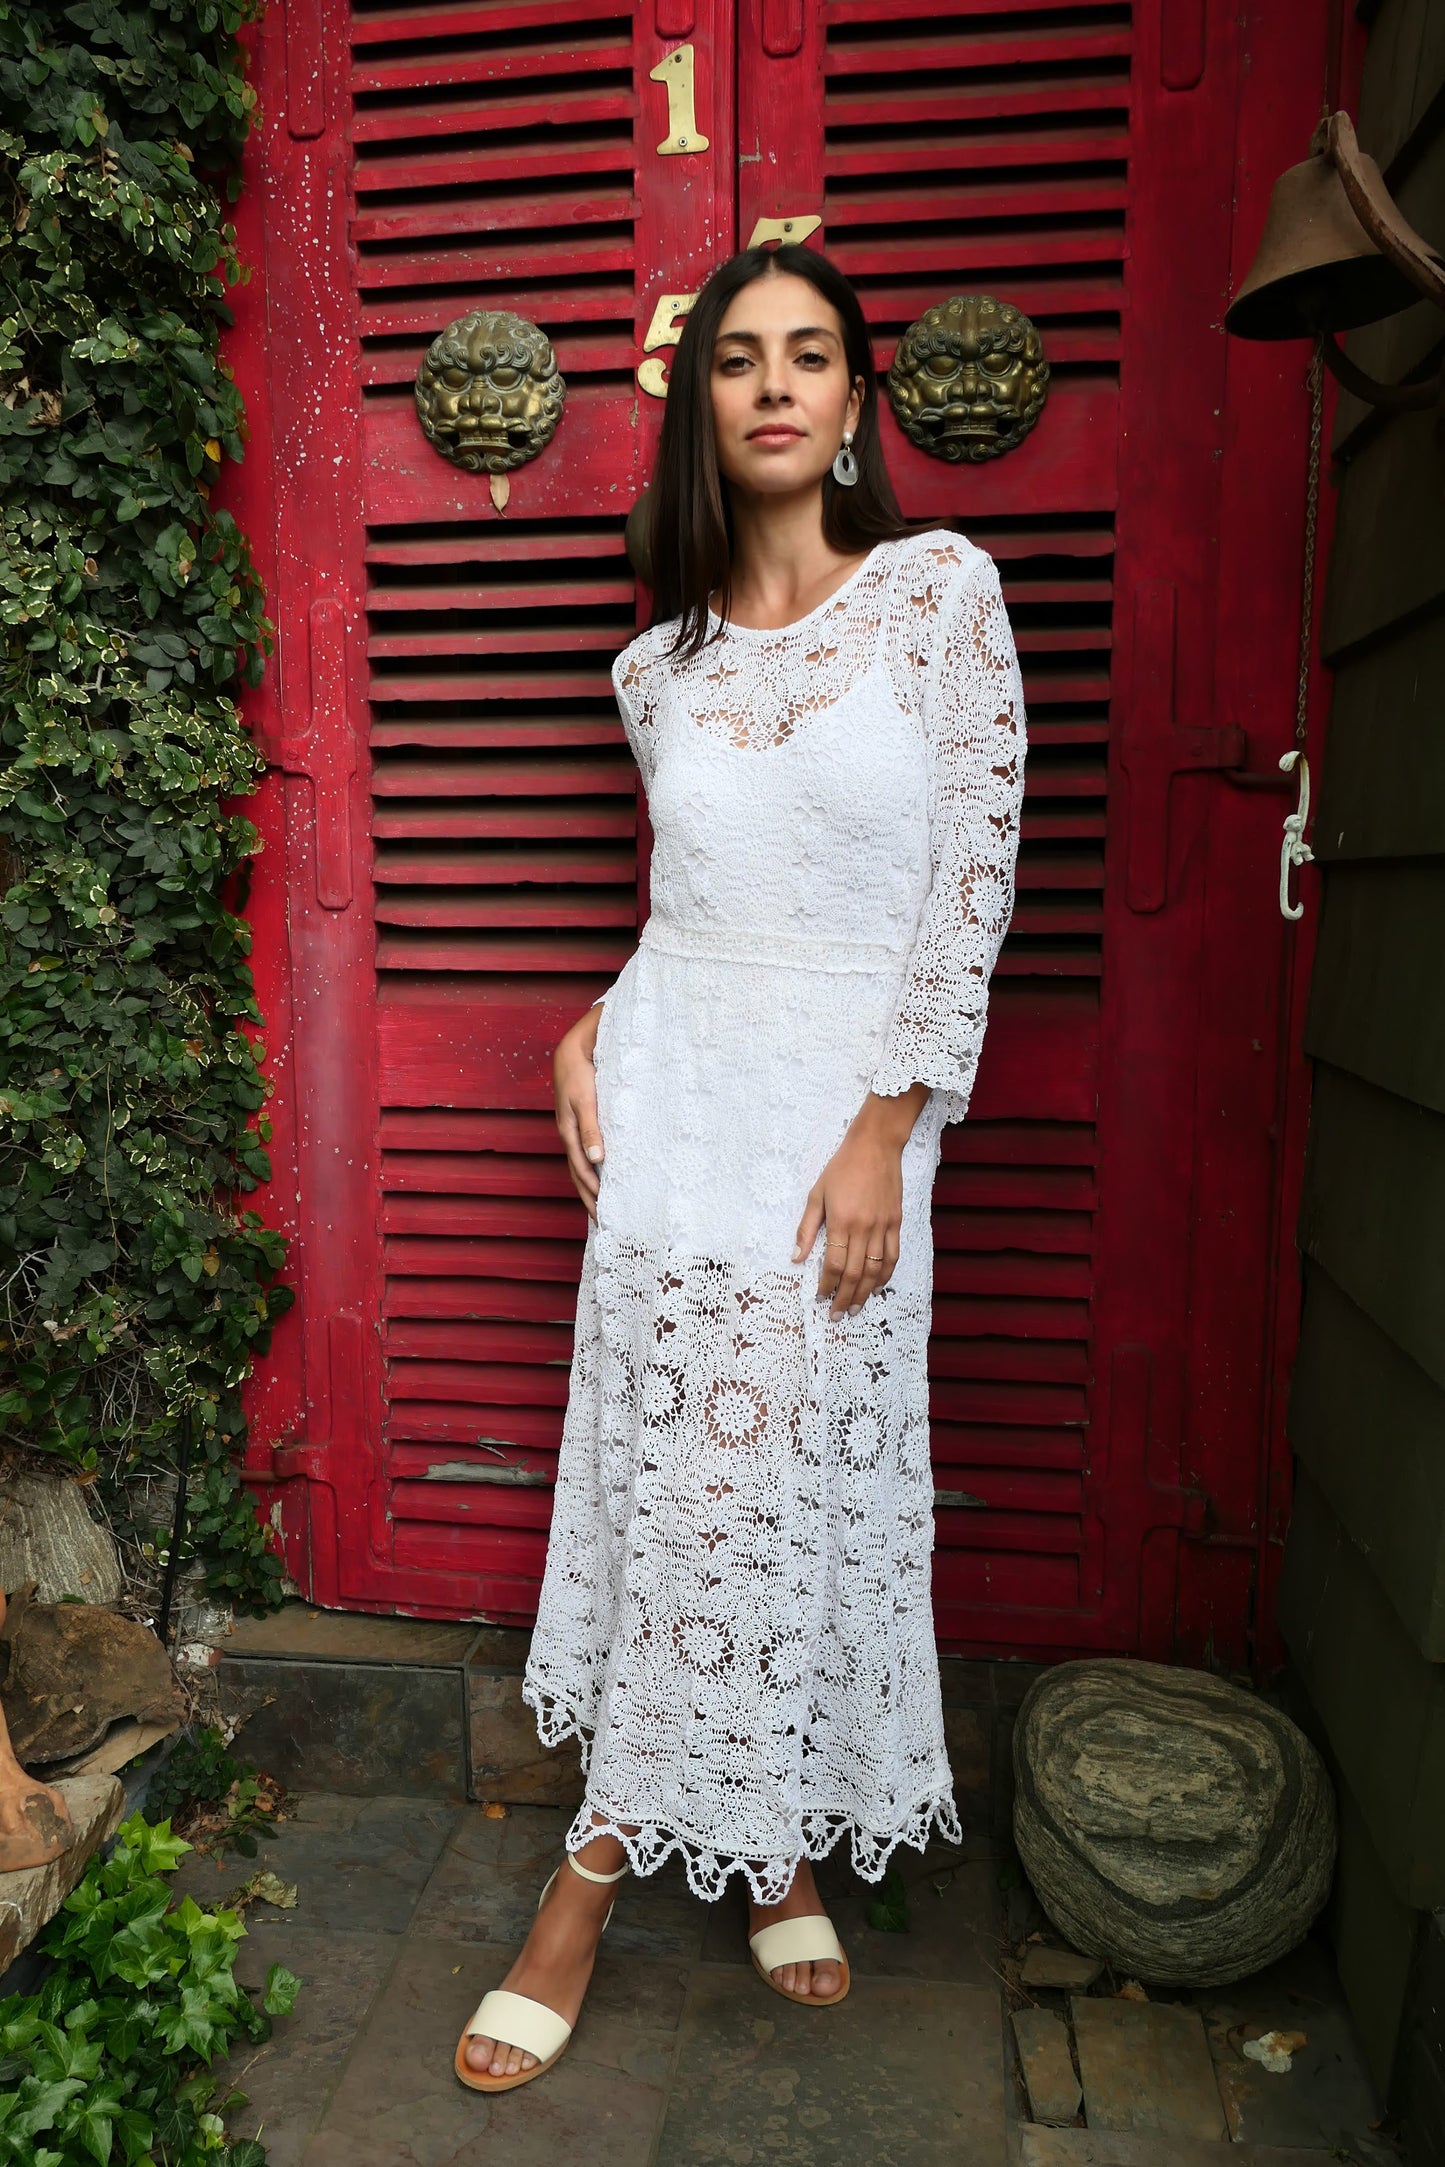 A maxi dress with a classic silhouette, long sleeves, and a comfortable elastic waistband. Stitched together by hand using individual vintage doily lace pieces. Throw it over a white slip and a pair of open-toe heels for a stroll out on the town at your favorite beach destination.  Color: White